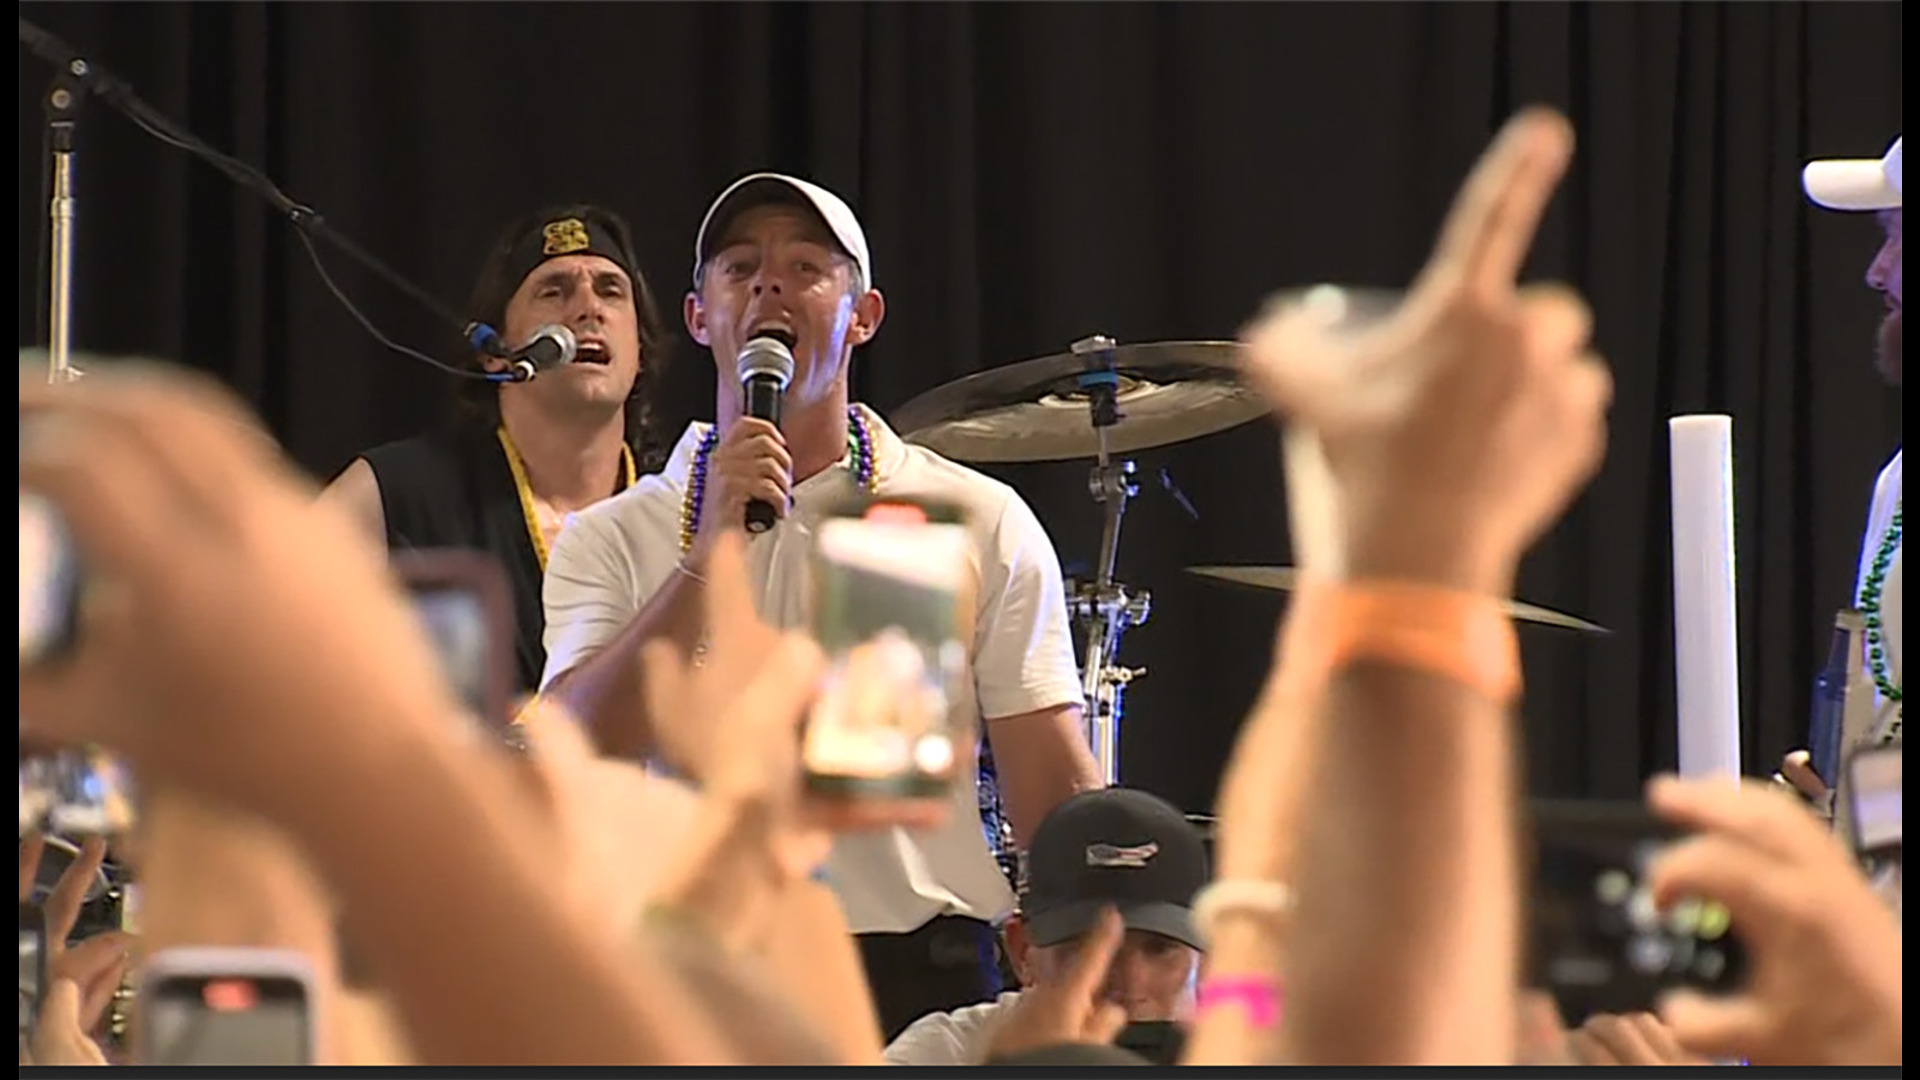 Rory McIlroy, one of the world's best golfers, let his hair down by downing a beer and then belting out a song in front of a raucous crowd in New Orleans.